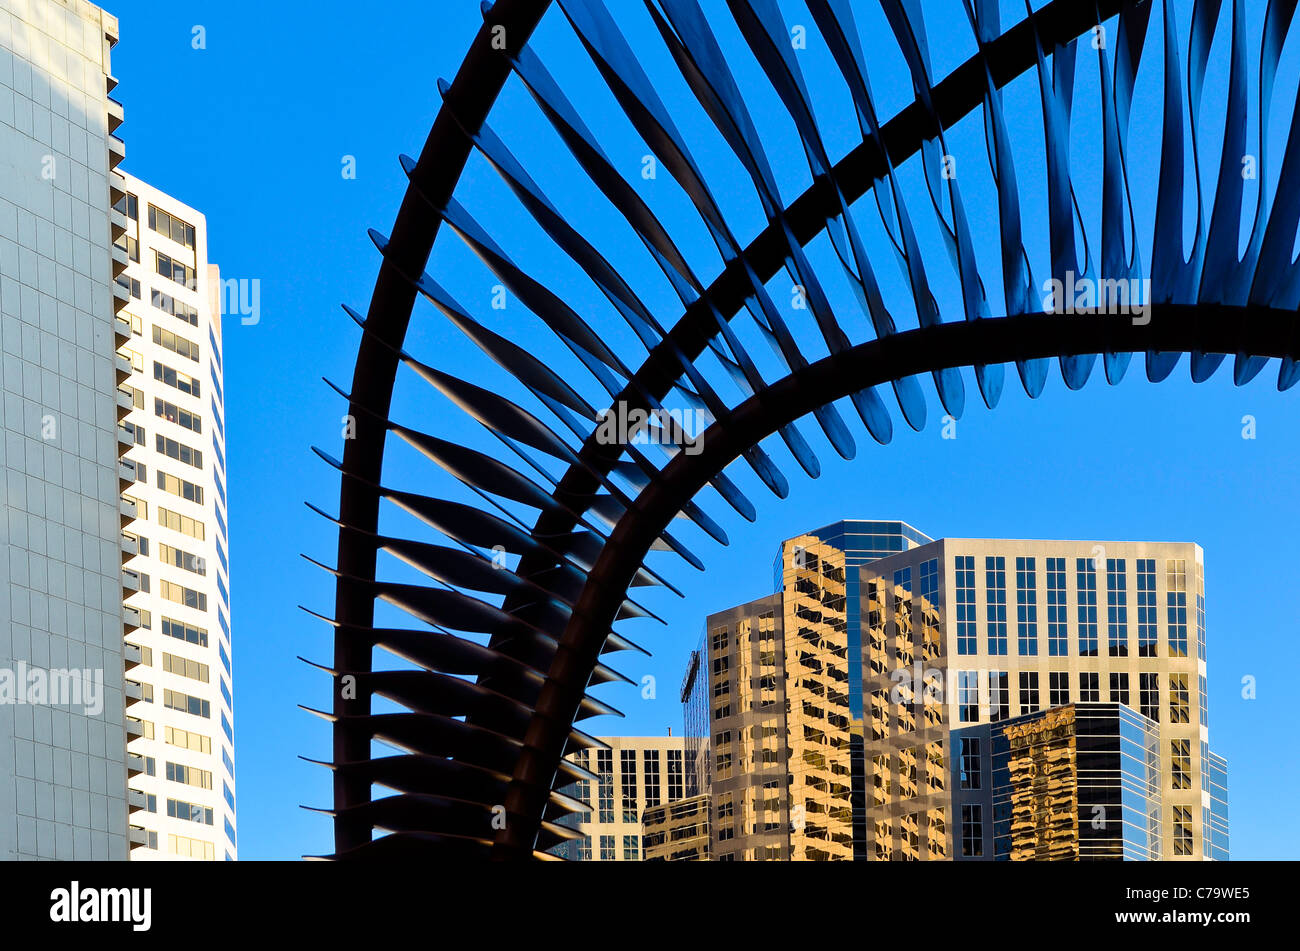 Sculpture titled 'Weaving Fence' downtown Calgary, Alberta, Canada Stock Photo